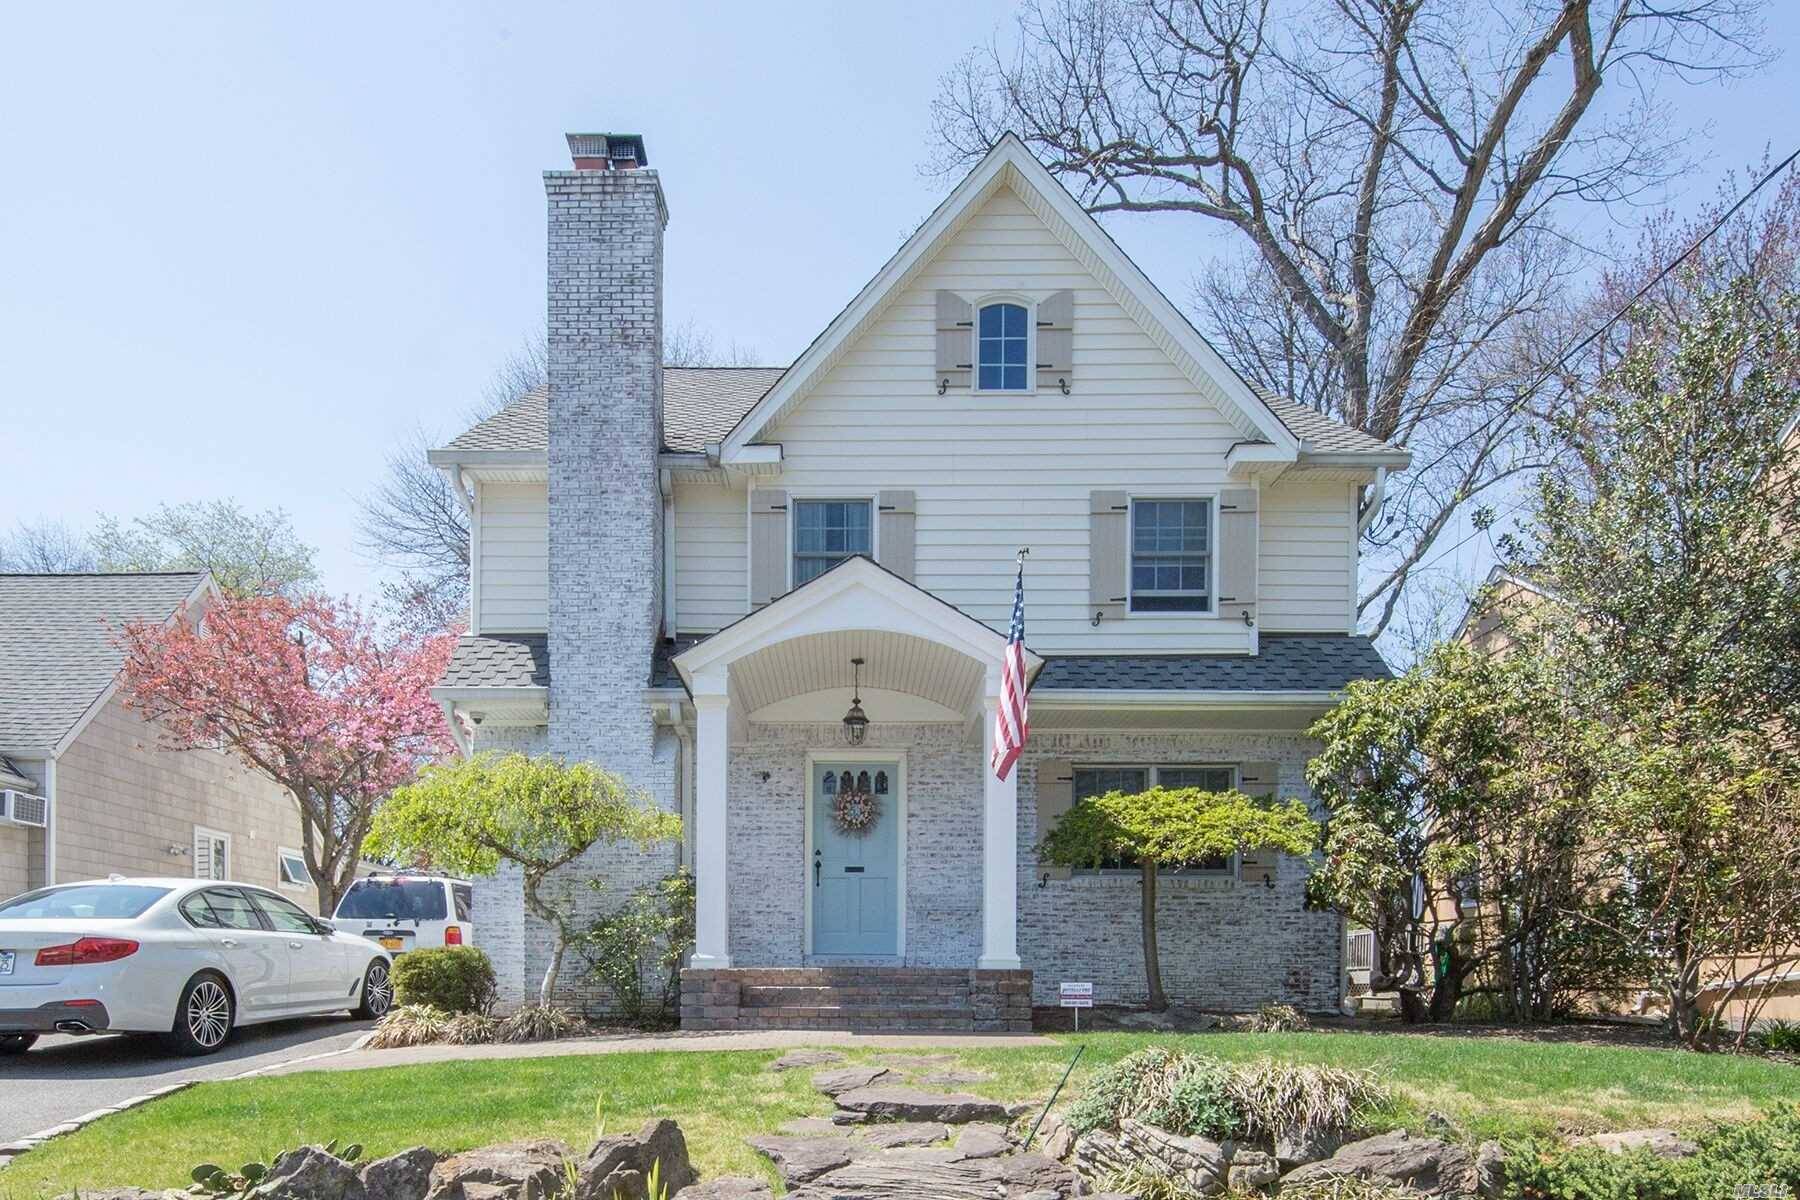 Spacious And Perfect Colonial Updated In 2008 Nested On 9000 Sf Lot Featuring 5/6 Bedrooms, 3 Baths In Prime Location Of Valley Stream.